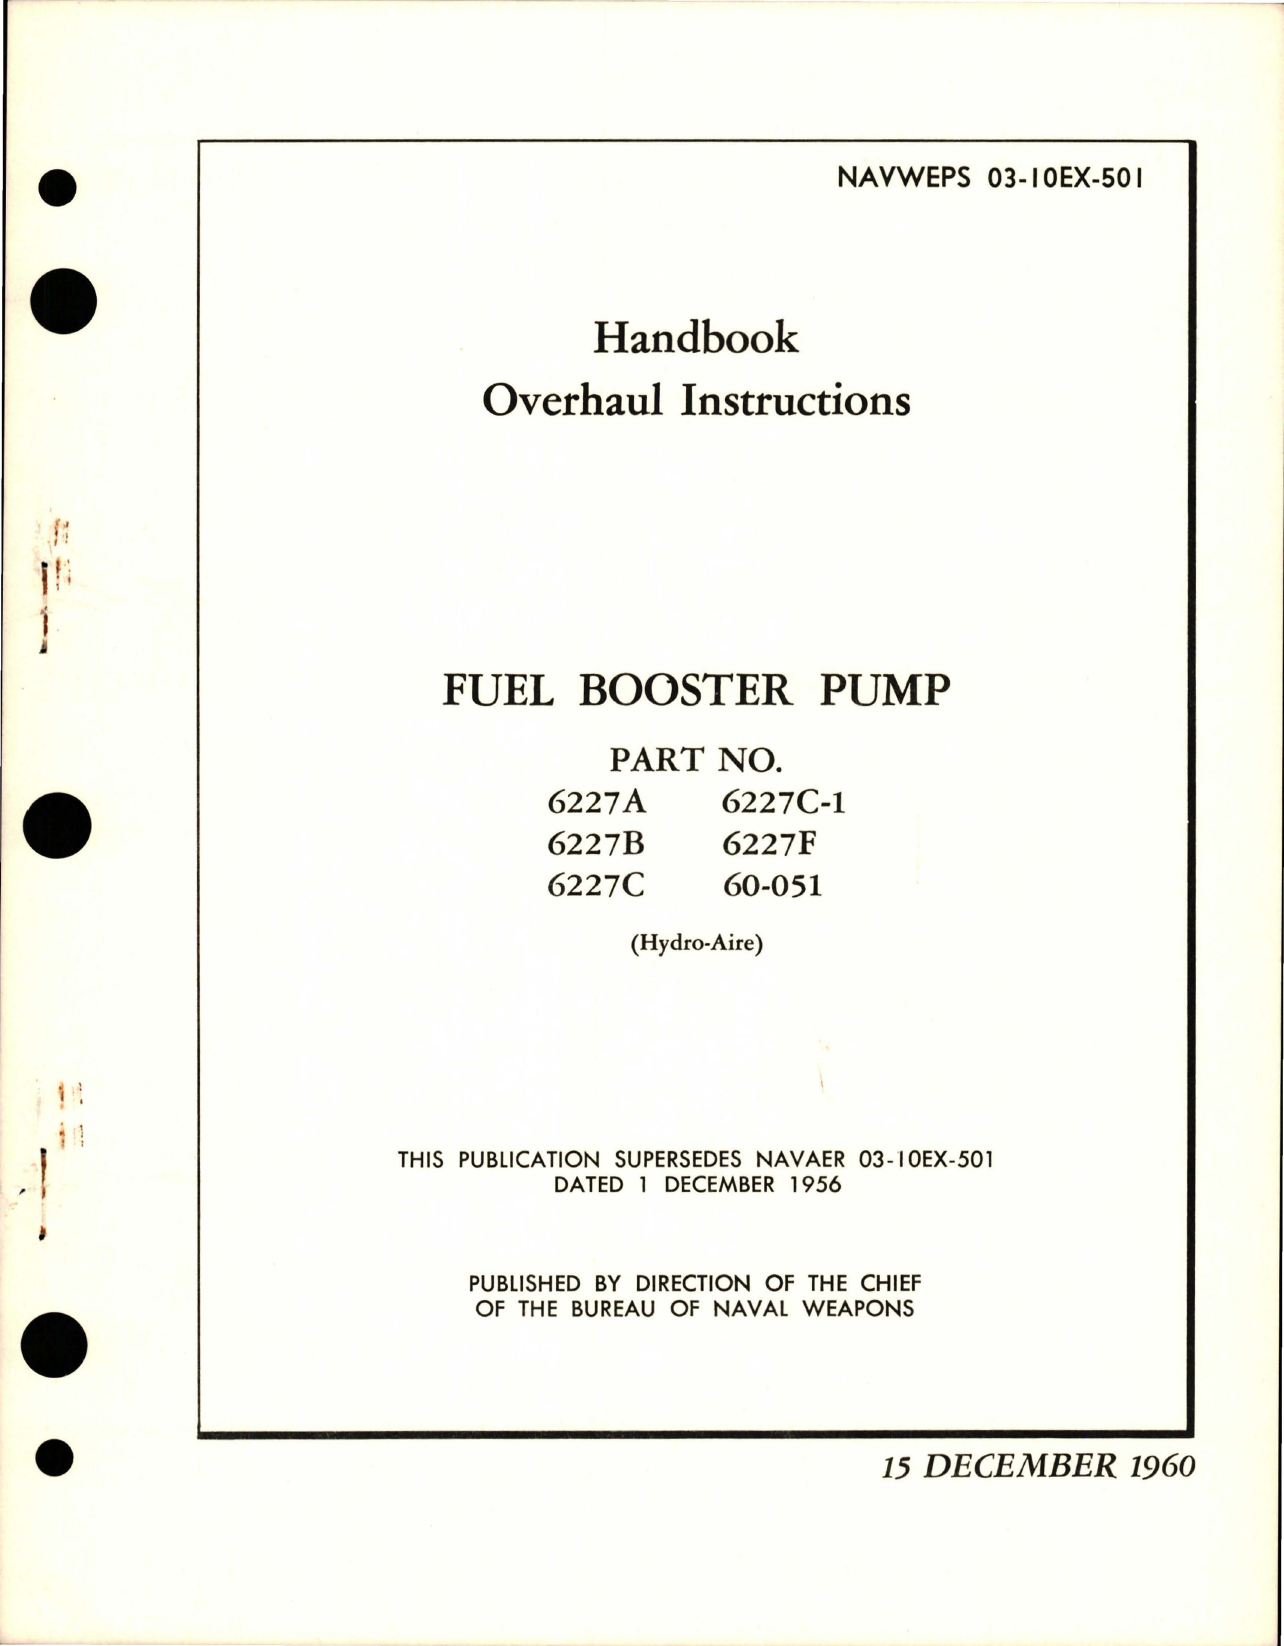 Sample page 1 from AirCorps Library document: Overhaul Instructions for Fuel Booster Pump